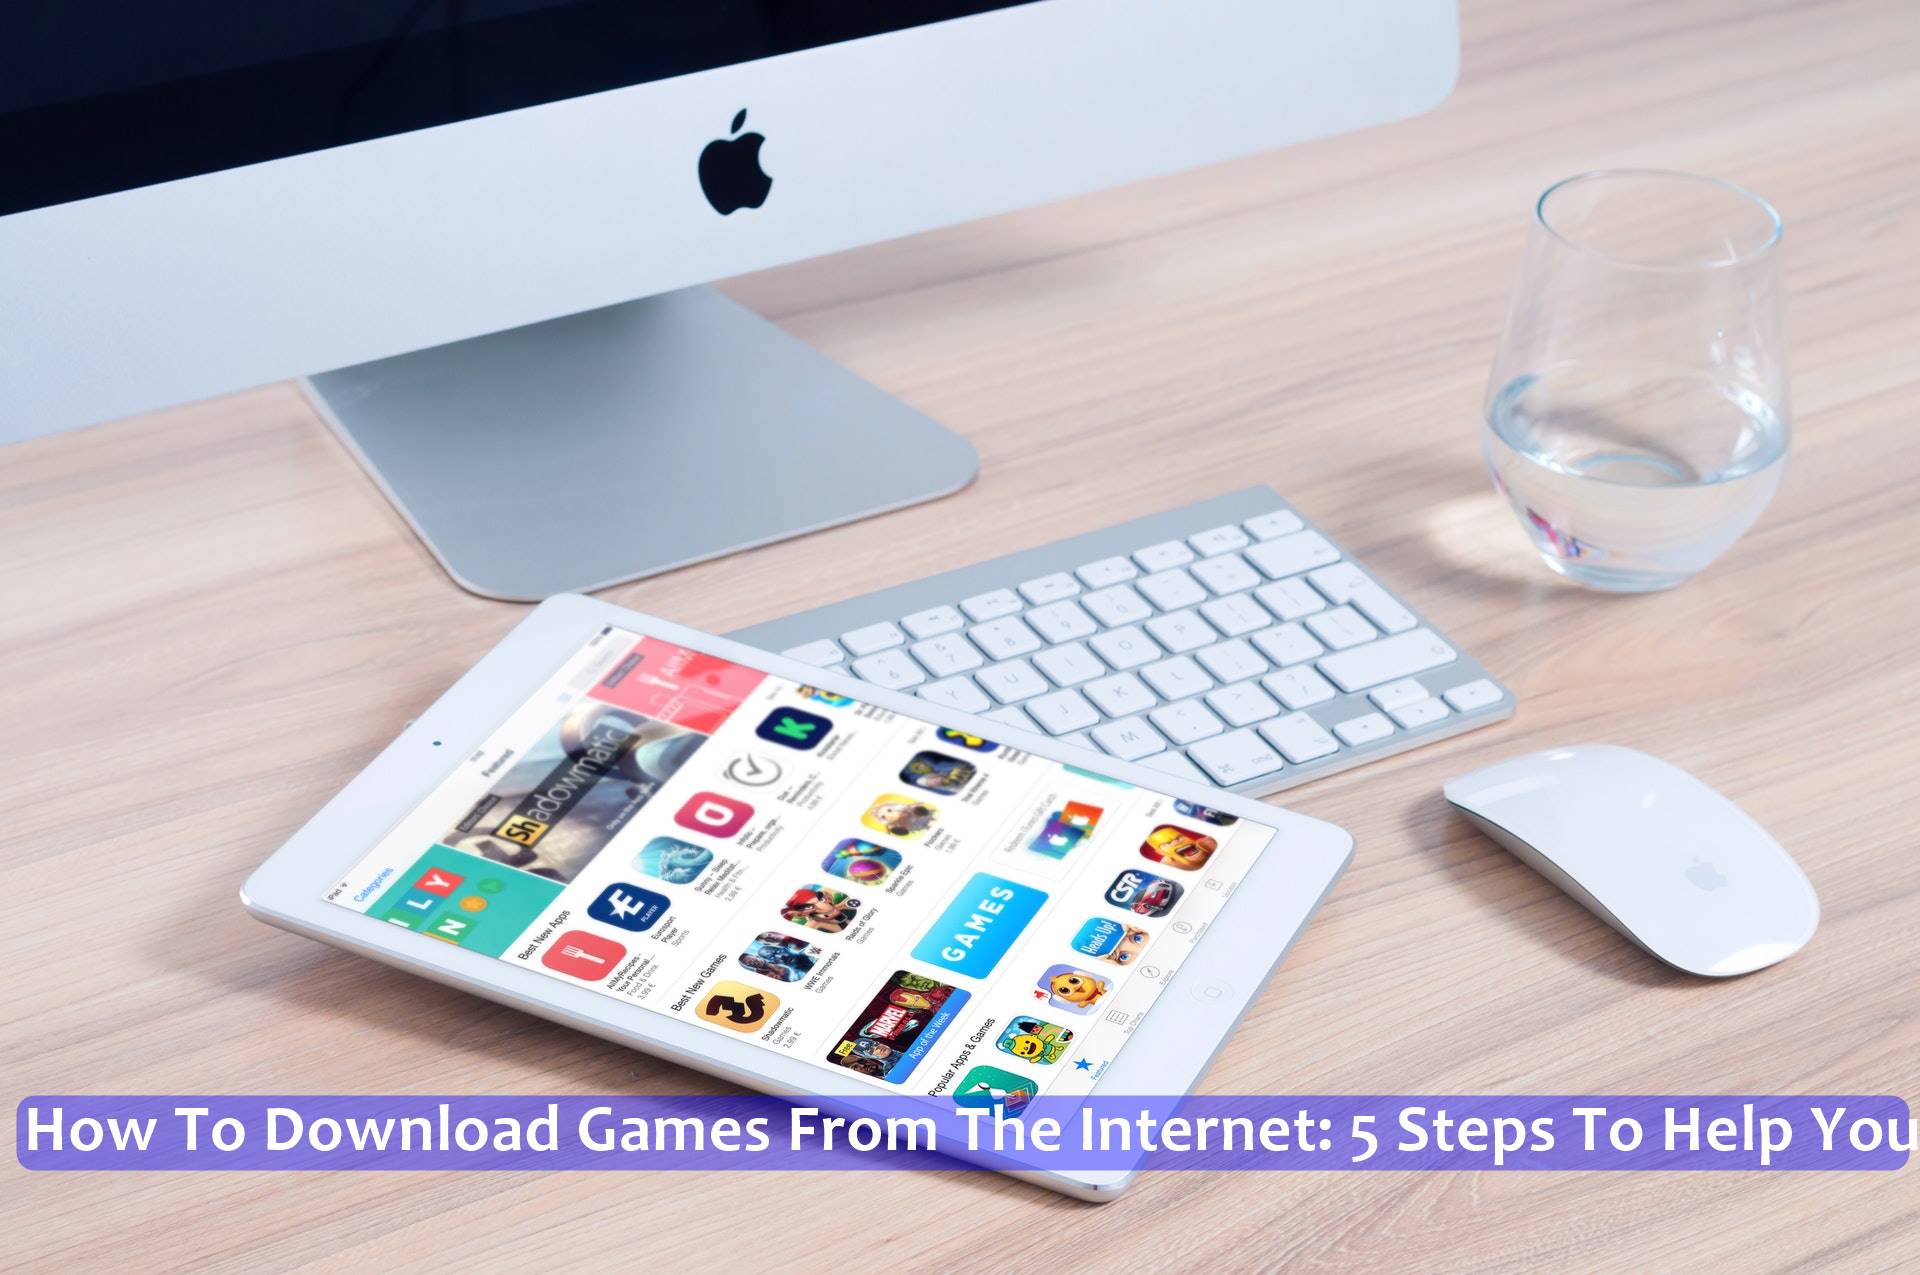 How To Download Games From The Internet: 5 Steps To Help You